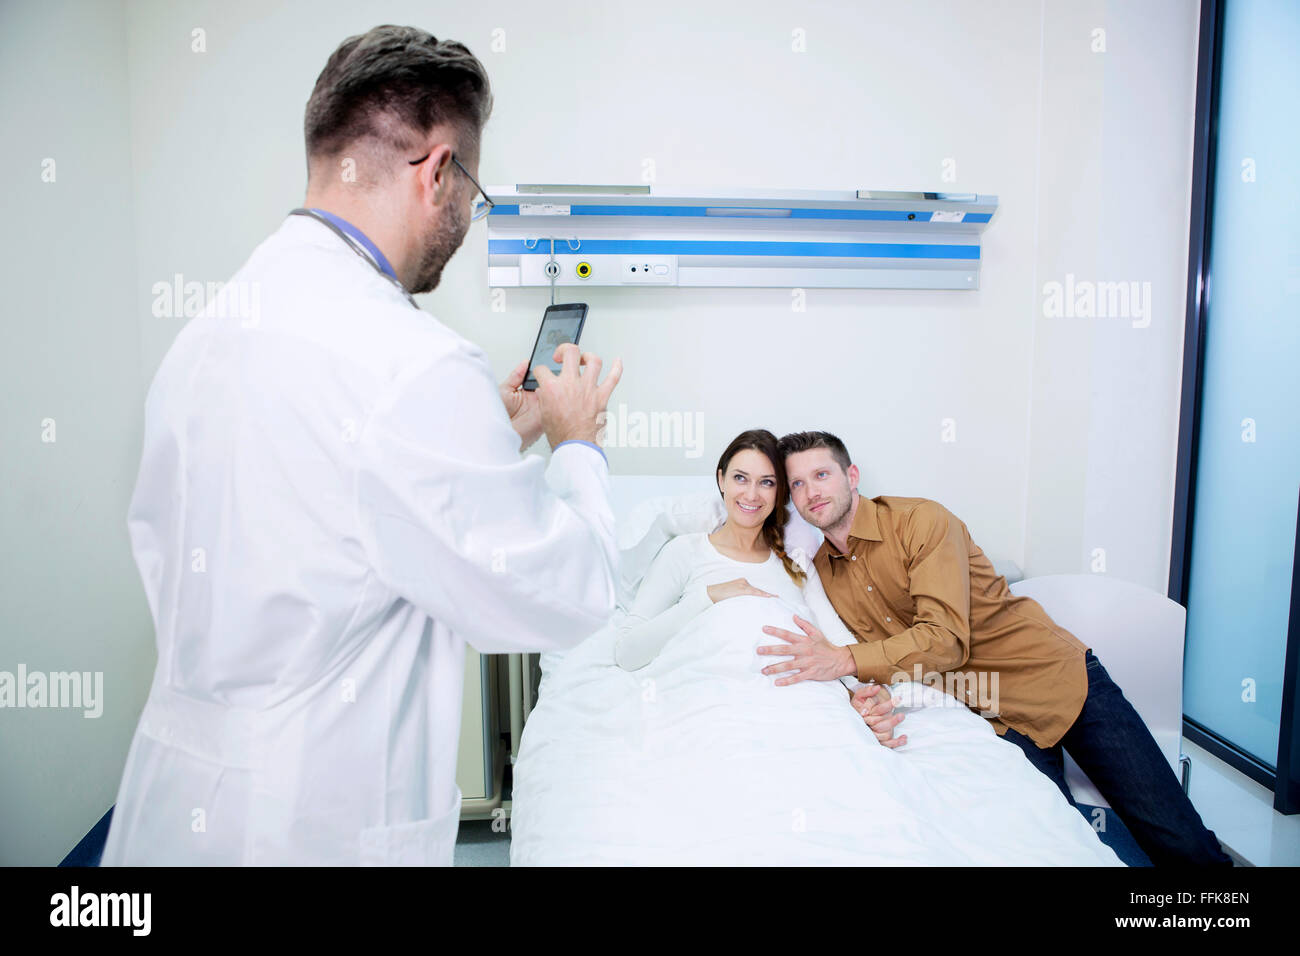 Doctor taking a picture of patient and boyfriend Stock Photo